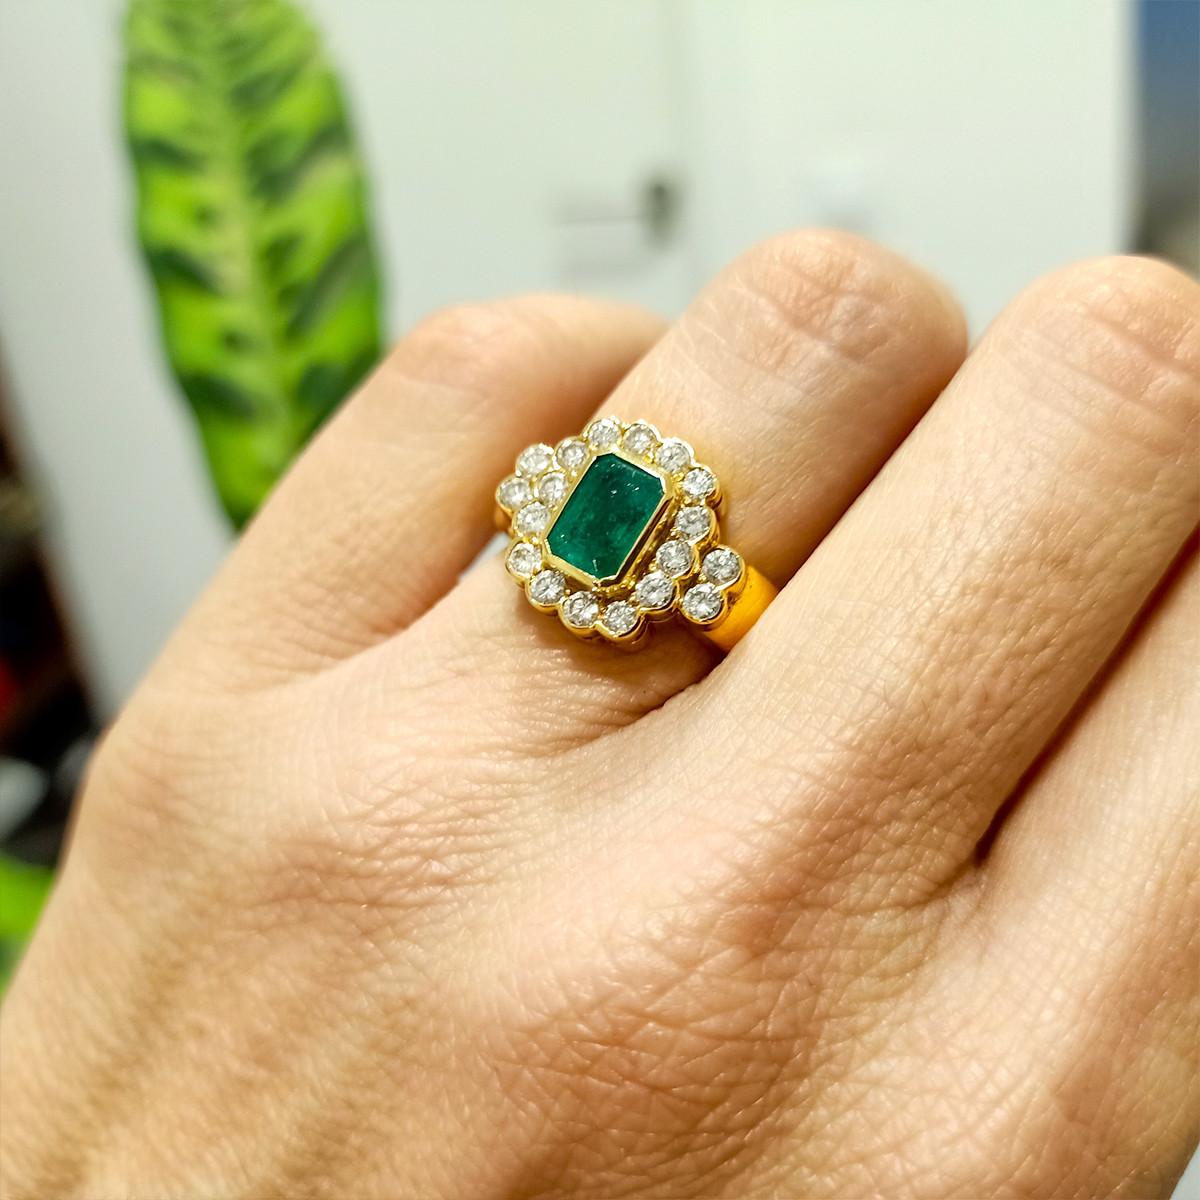 GOLD EMERALD AND DIAMONDS RING